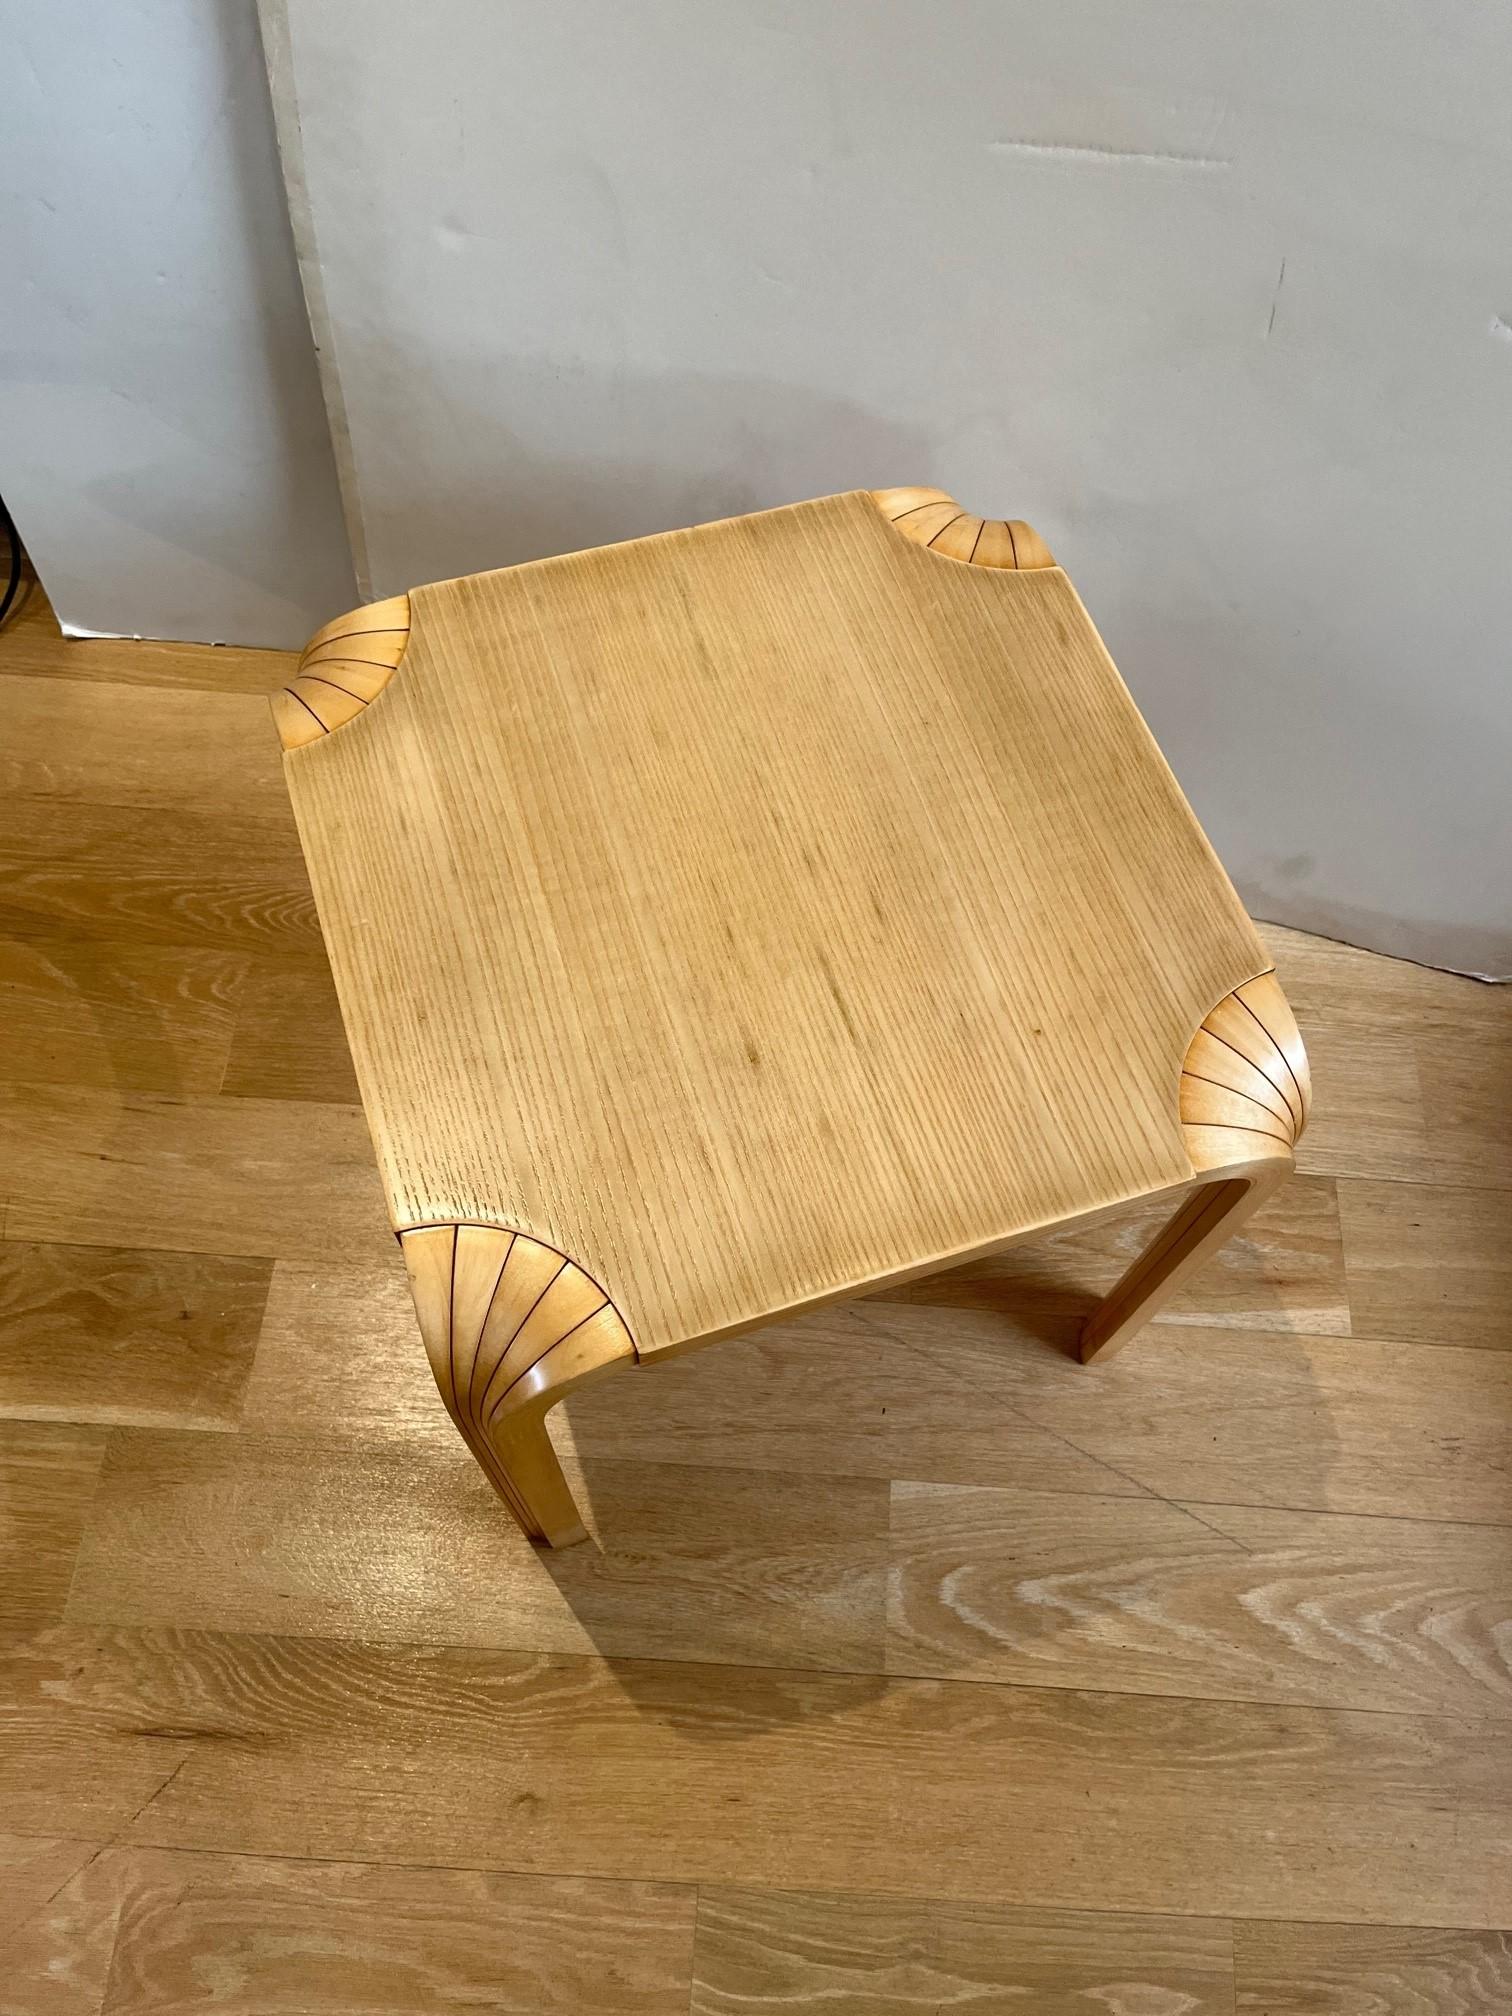 Vintage handmade fan shaped legs coffee table designed by Alvar Aalto
Made in Finland, can be used as a side table or end table, the table is in good vintage condition.